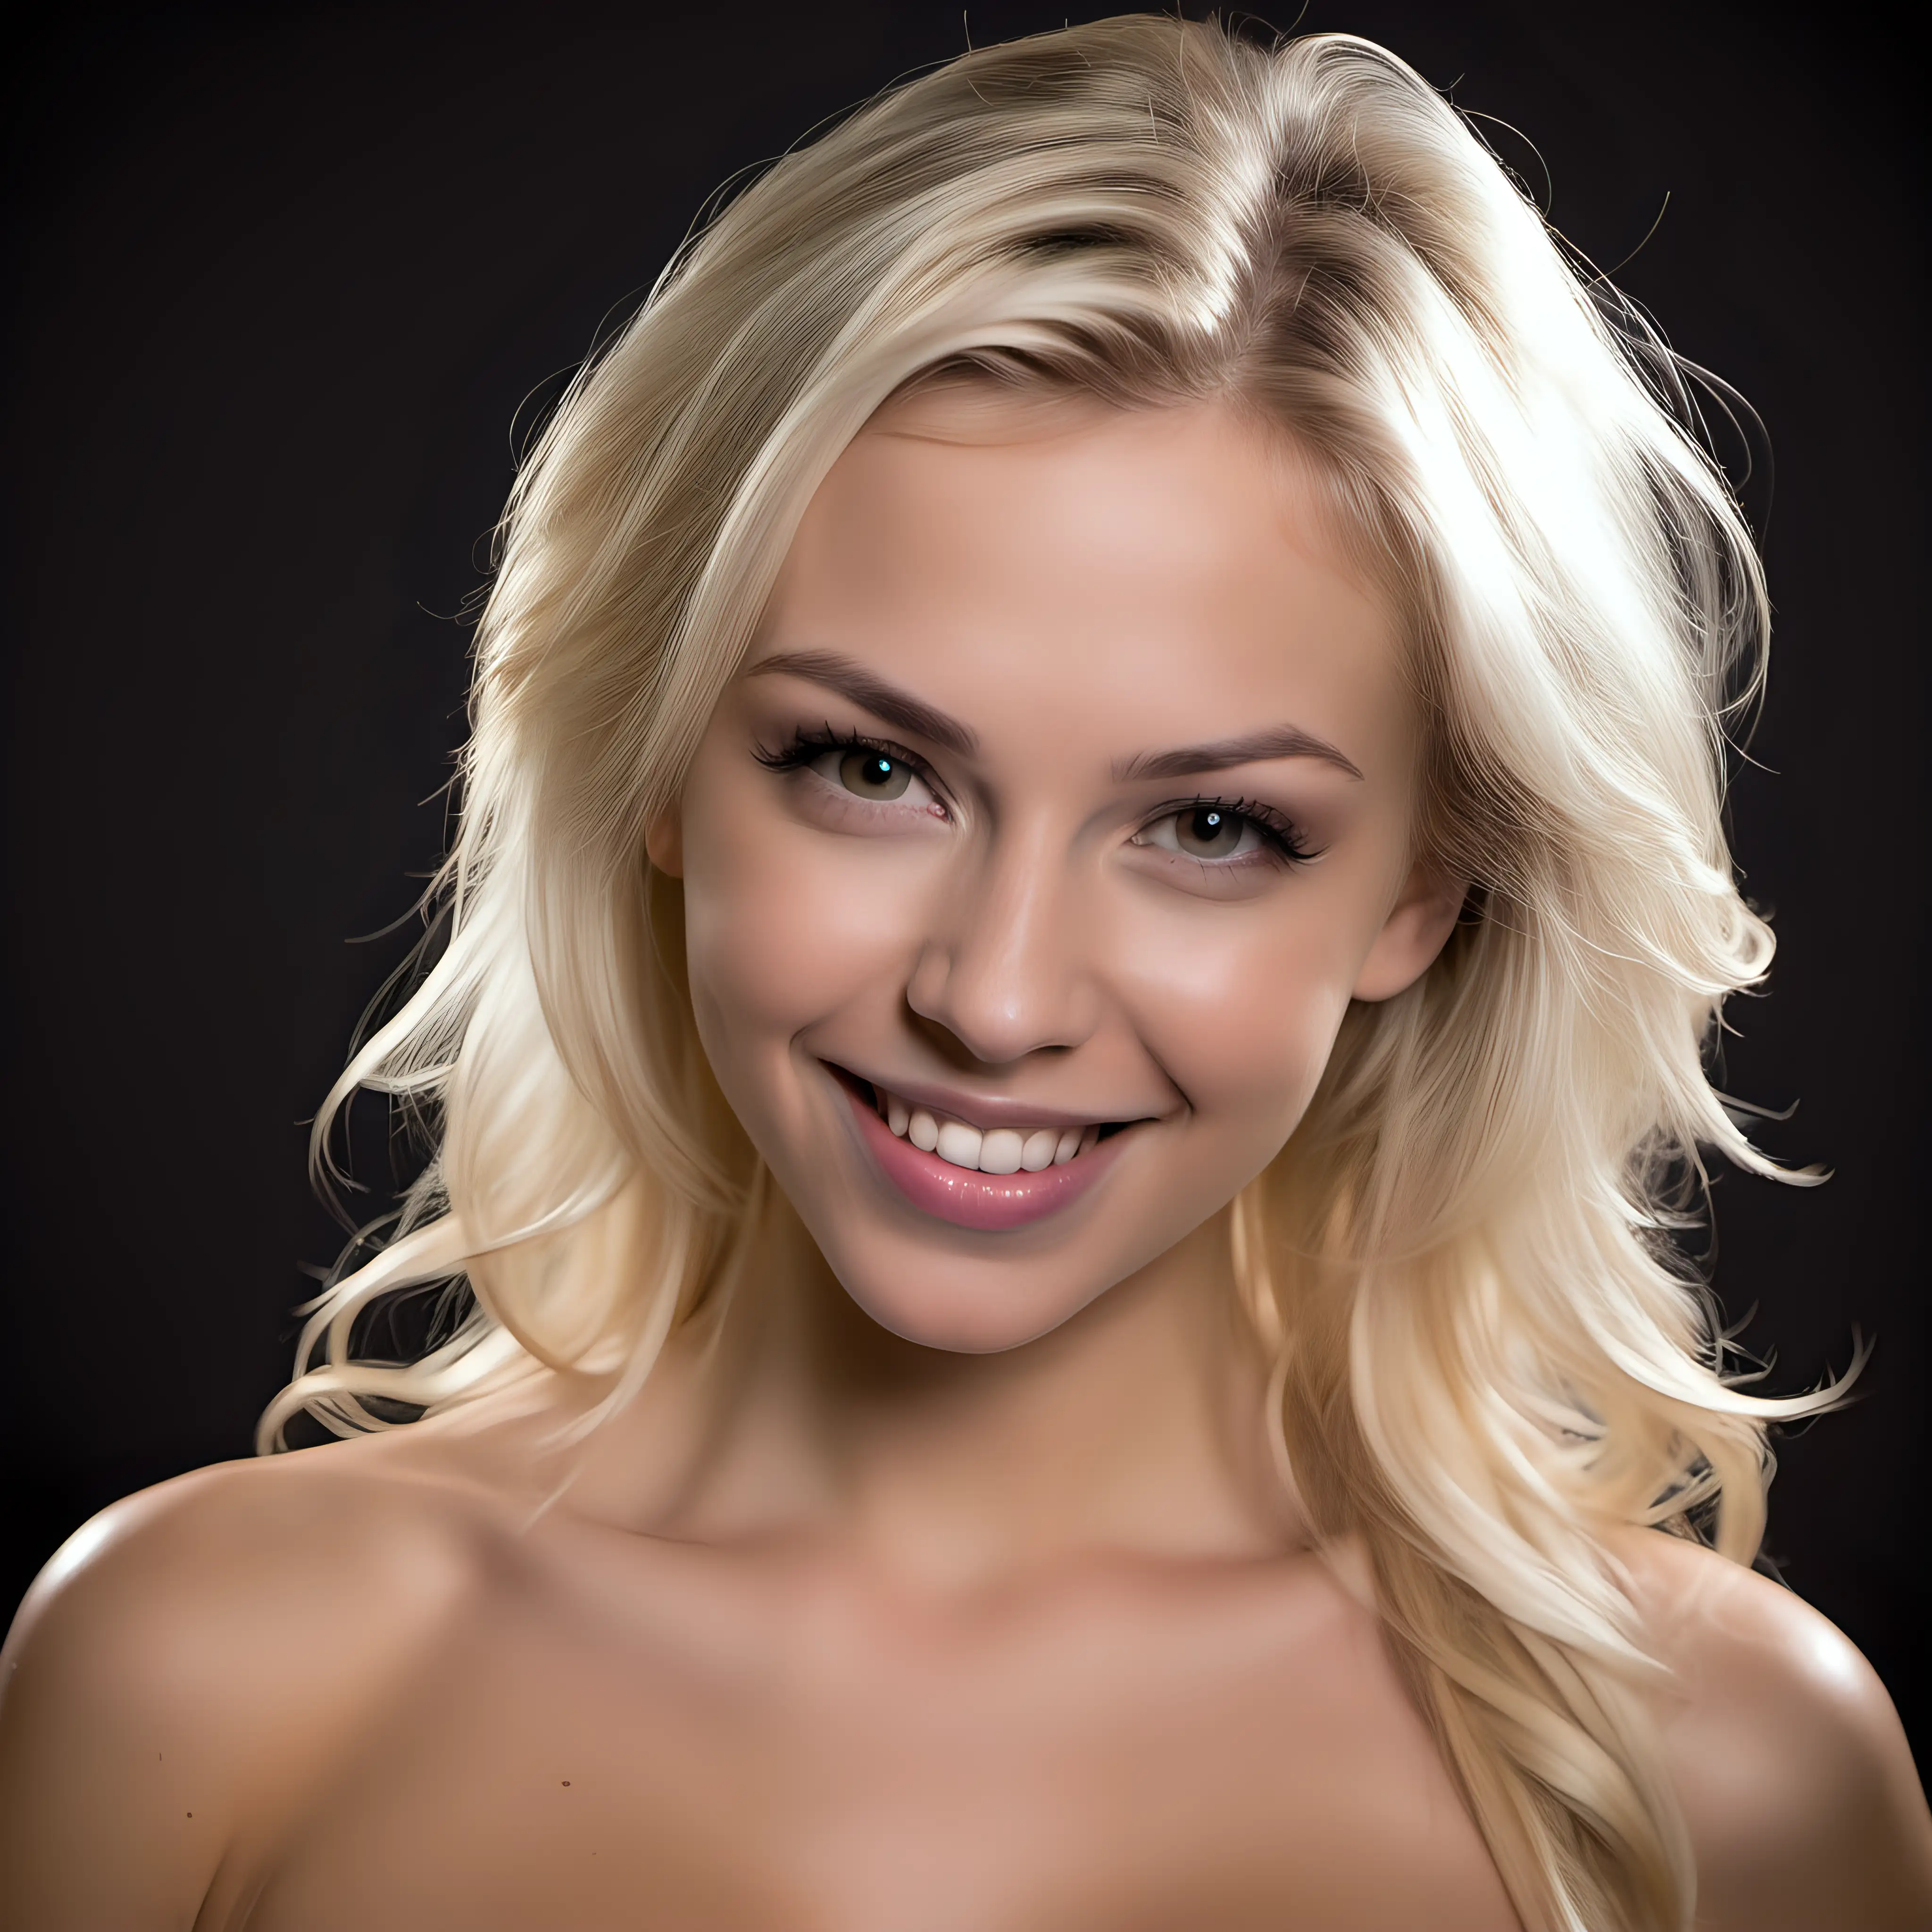 Seductive Blonde Model with a Playful Smile in Elegant Attire